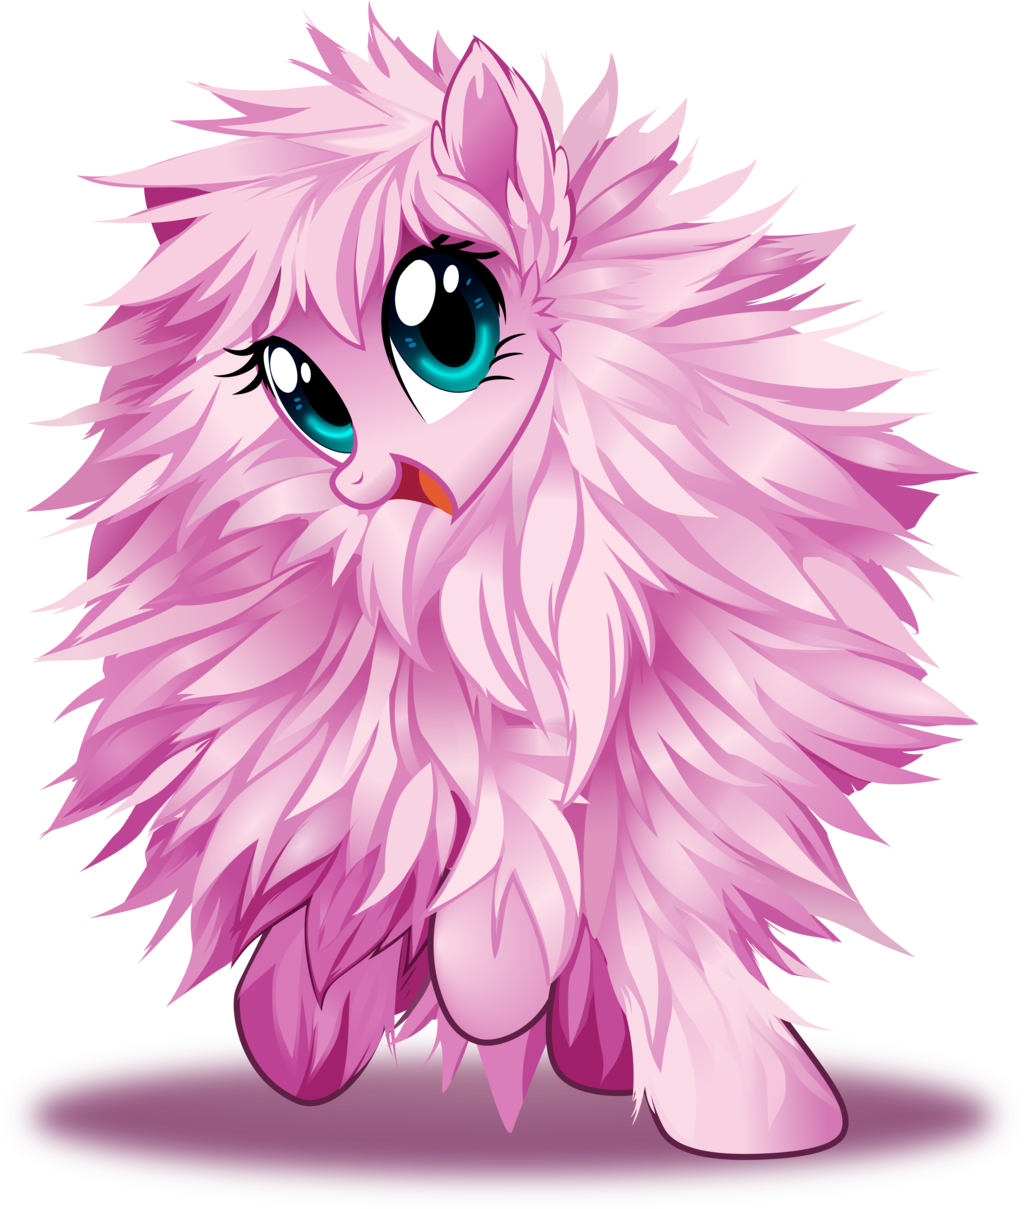 img-1403030-2-fluffle_puff_by_pozdn9k-d6